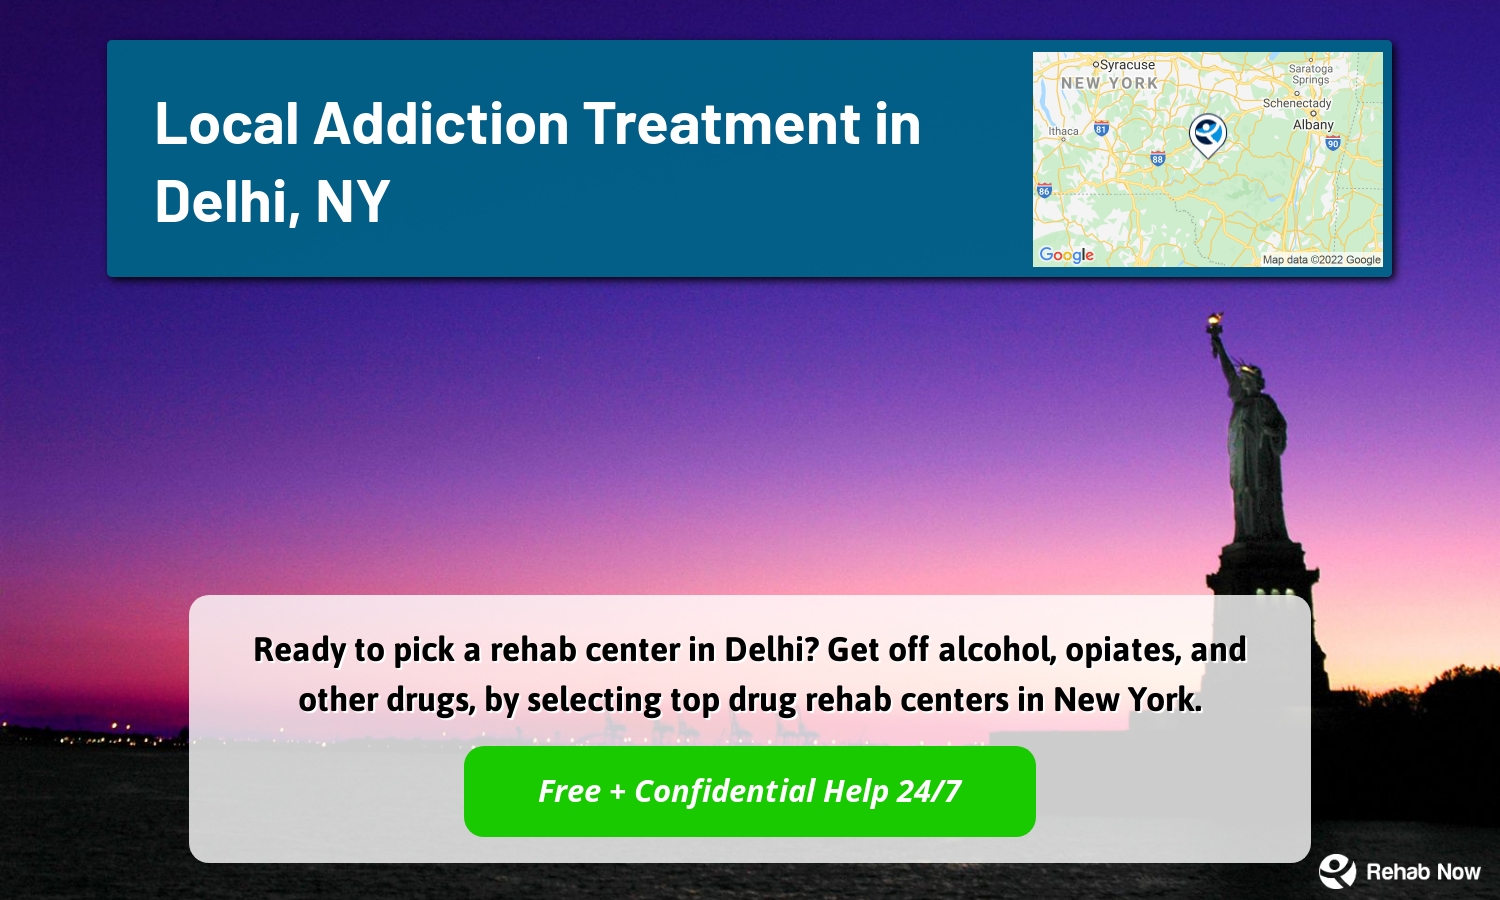 Ready to pick a rehab center in Delhi? Get off alcohol, opiates, and other drugs, by selecting top drug rehab centers in New York.